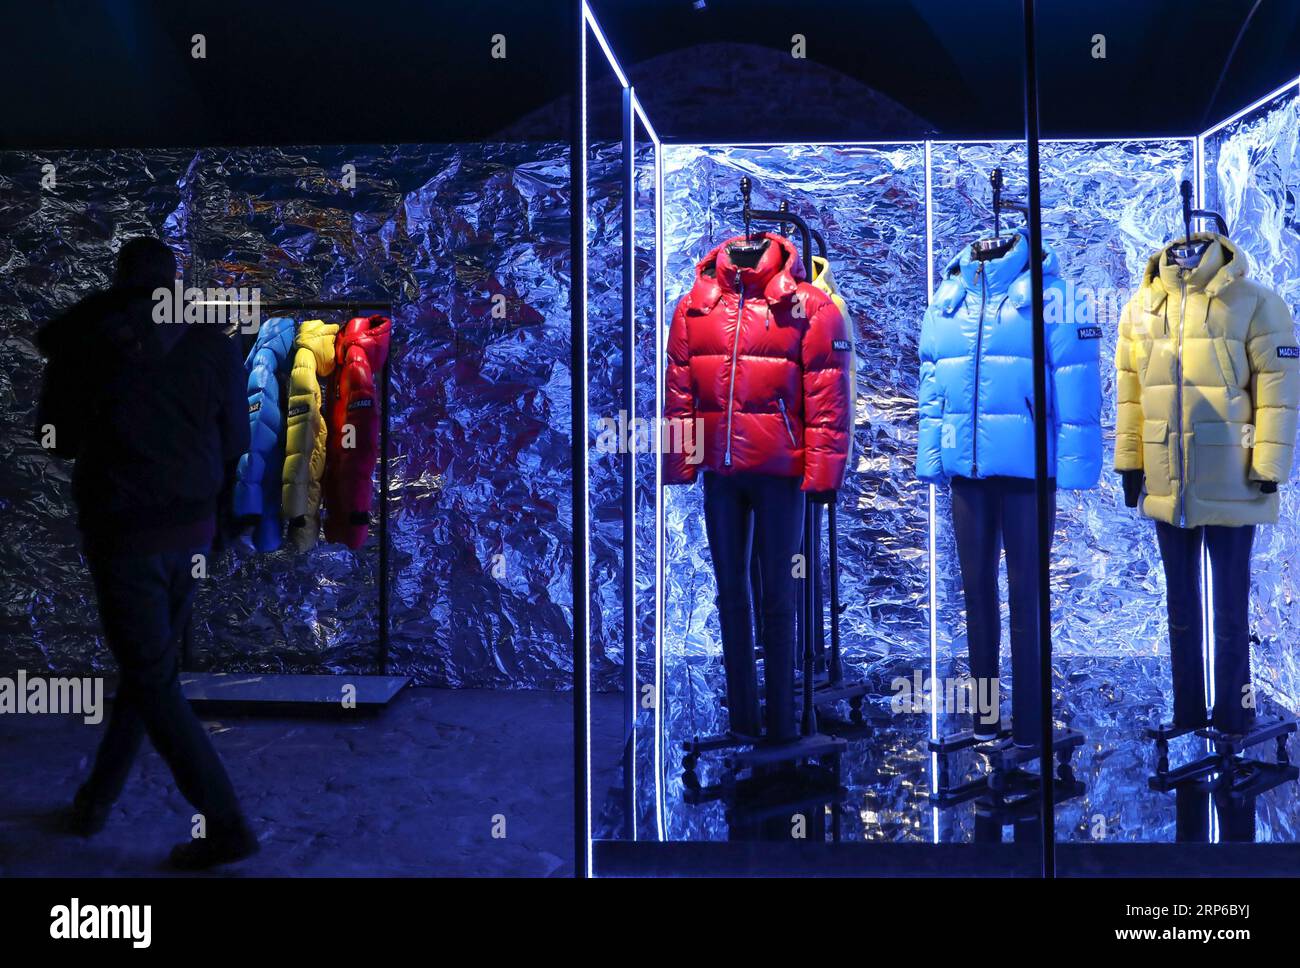 (190108) -- FLORENCE (ITALY), Jan. 8, 2019 -- A man visits the 95th Pitti Immagine Uomo exhibition in Florence, Italy, Jan. 8, 2019. The exhibition, one of the world s most important platforms for men s clothing and accessory collections, is held here from Jan. 8 to 11. ) ITALY-FLORENCE-MEN S CLOTHING AND ACCESSORY-EXHIBITION ChengxTingting PUBLICATIONxNOTxINxCHN Stock Photo